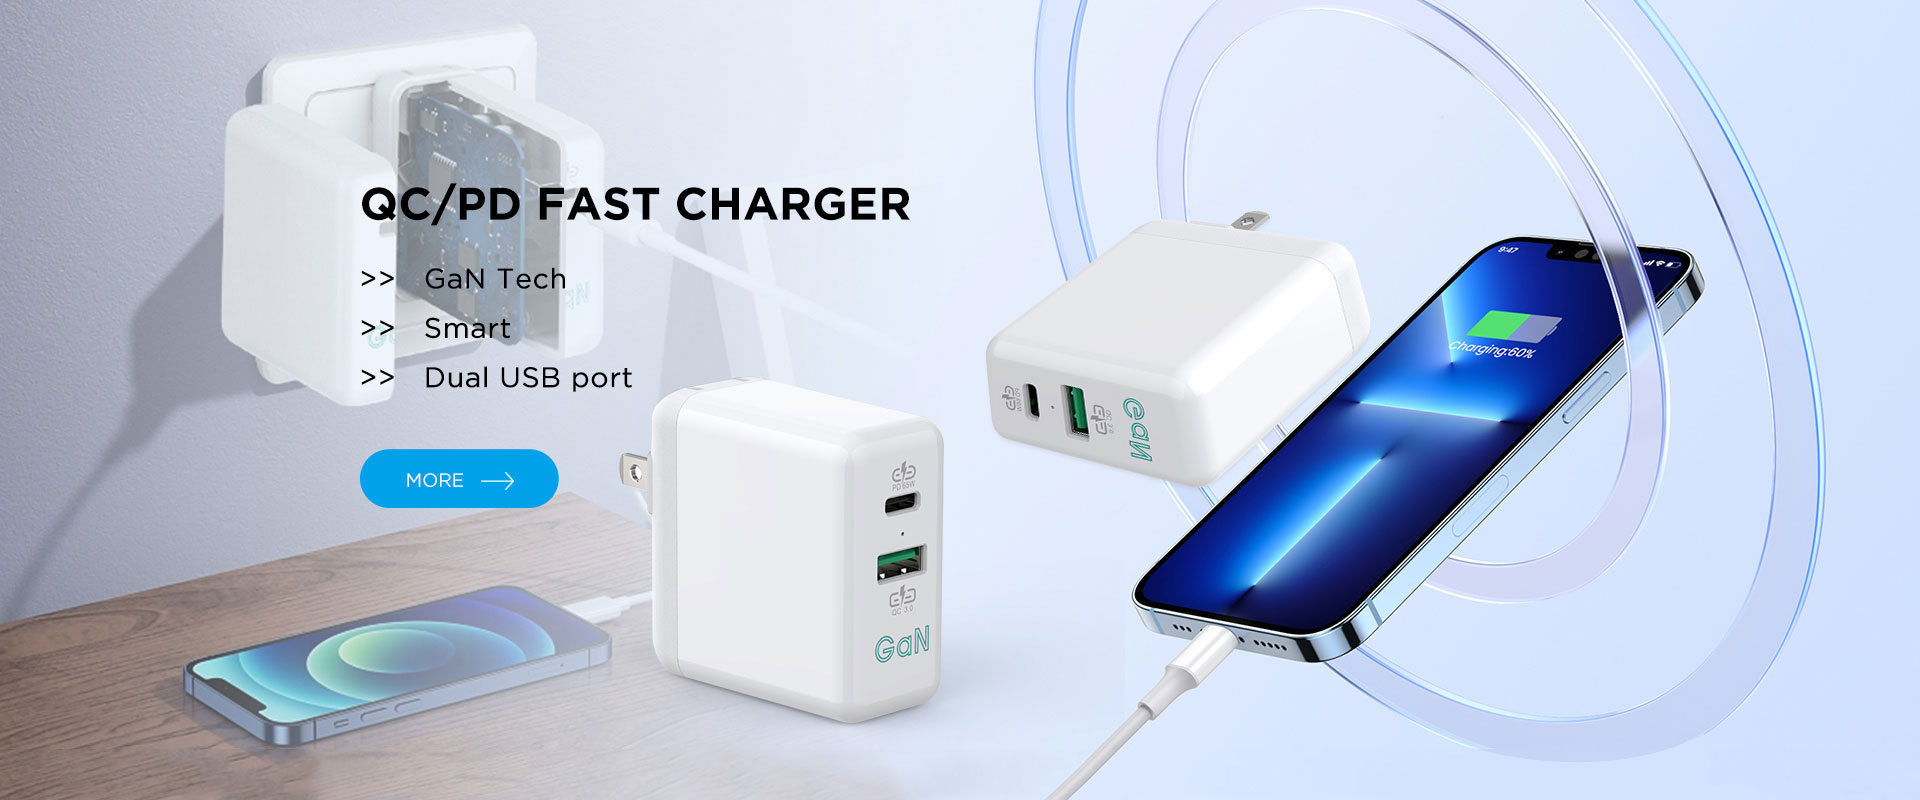 Quick Charger Manufacturers